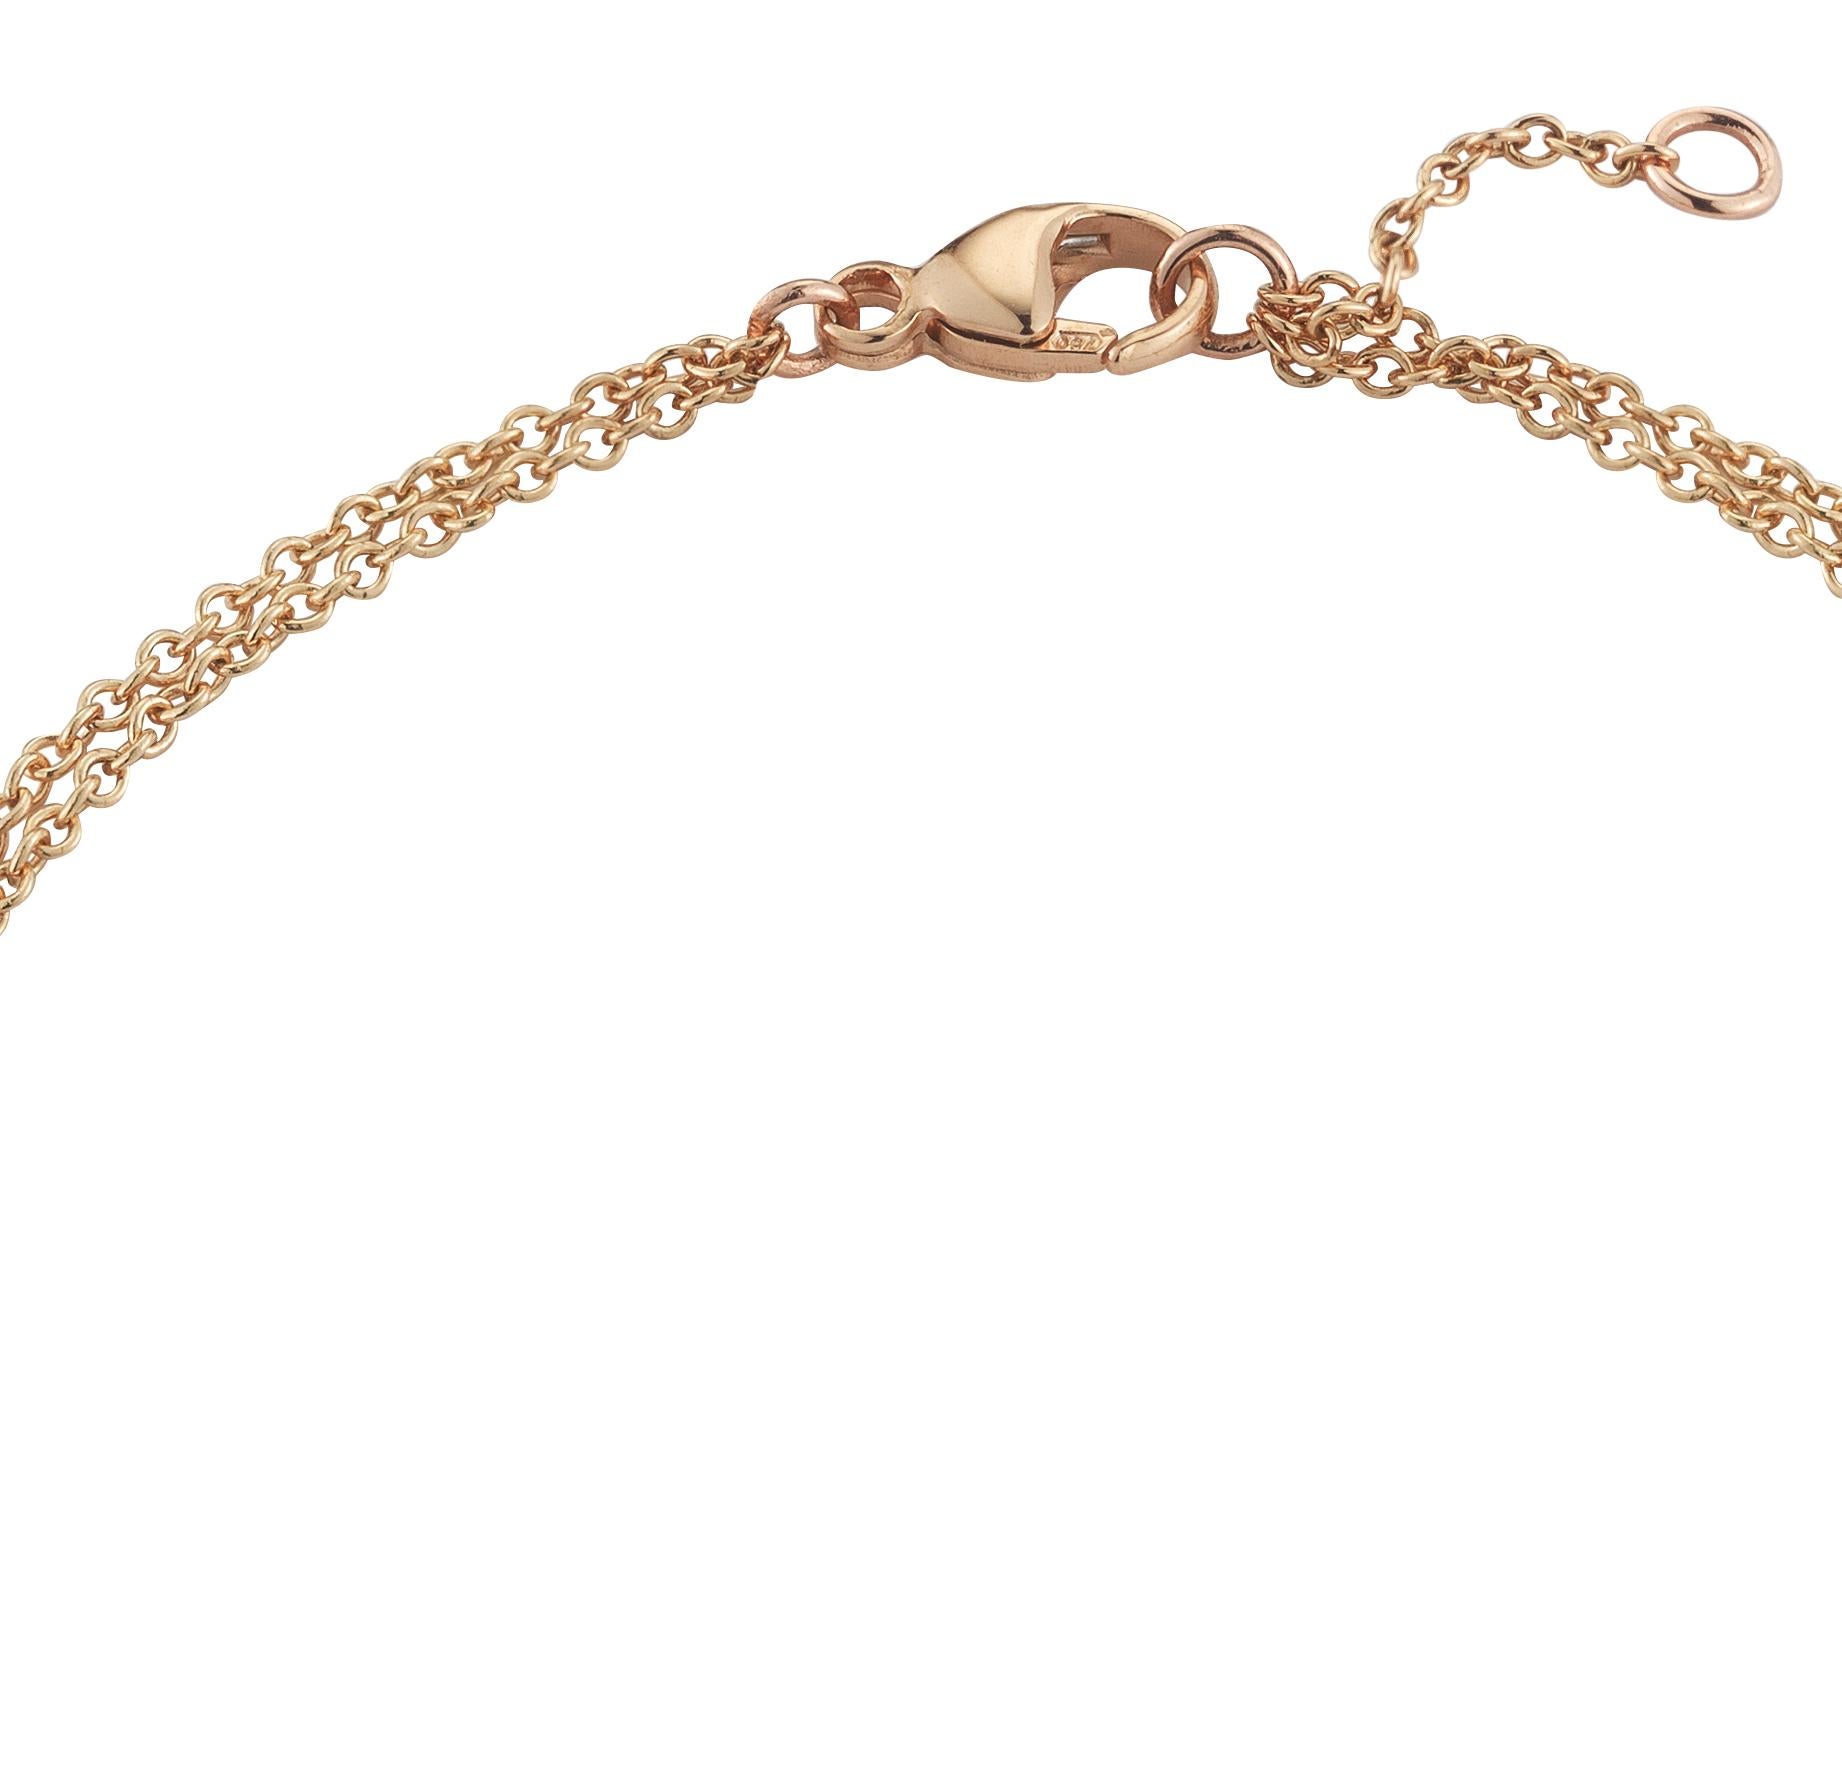 The sweetest heart charm suspended by delicate chain that is doubled up for a special look. 

18k rose gold 
heart charm is 6.6mmx5.5mm 
extender for size 
complimentary domestic ground shipping 